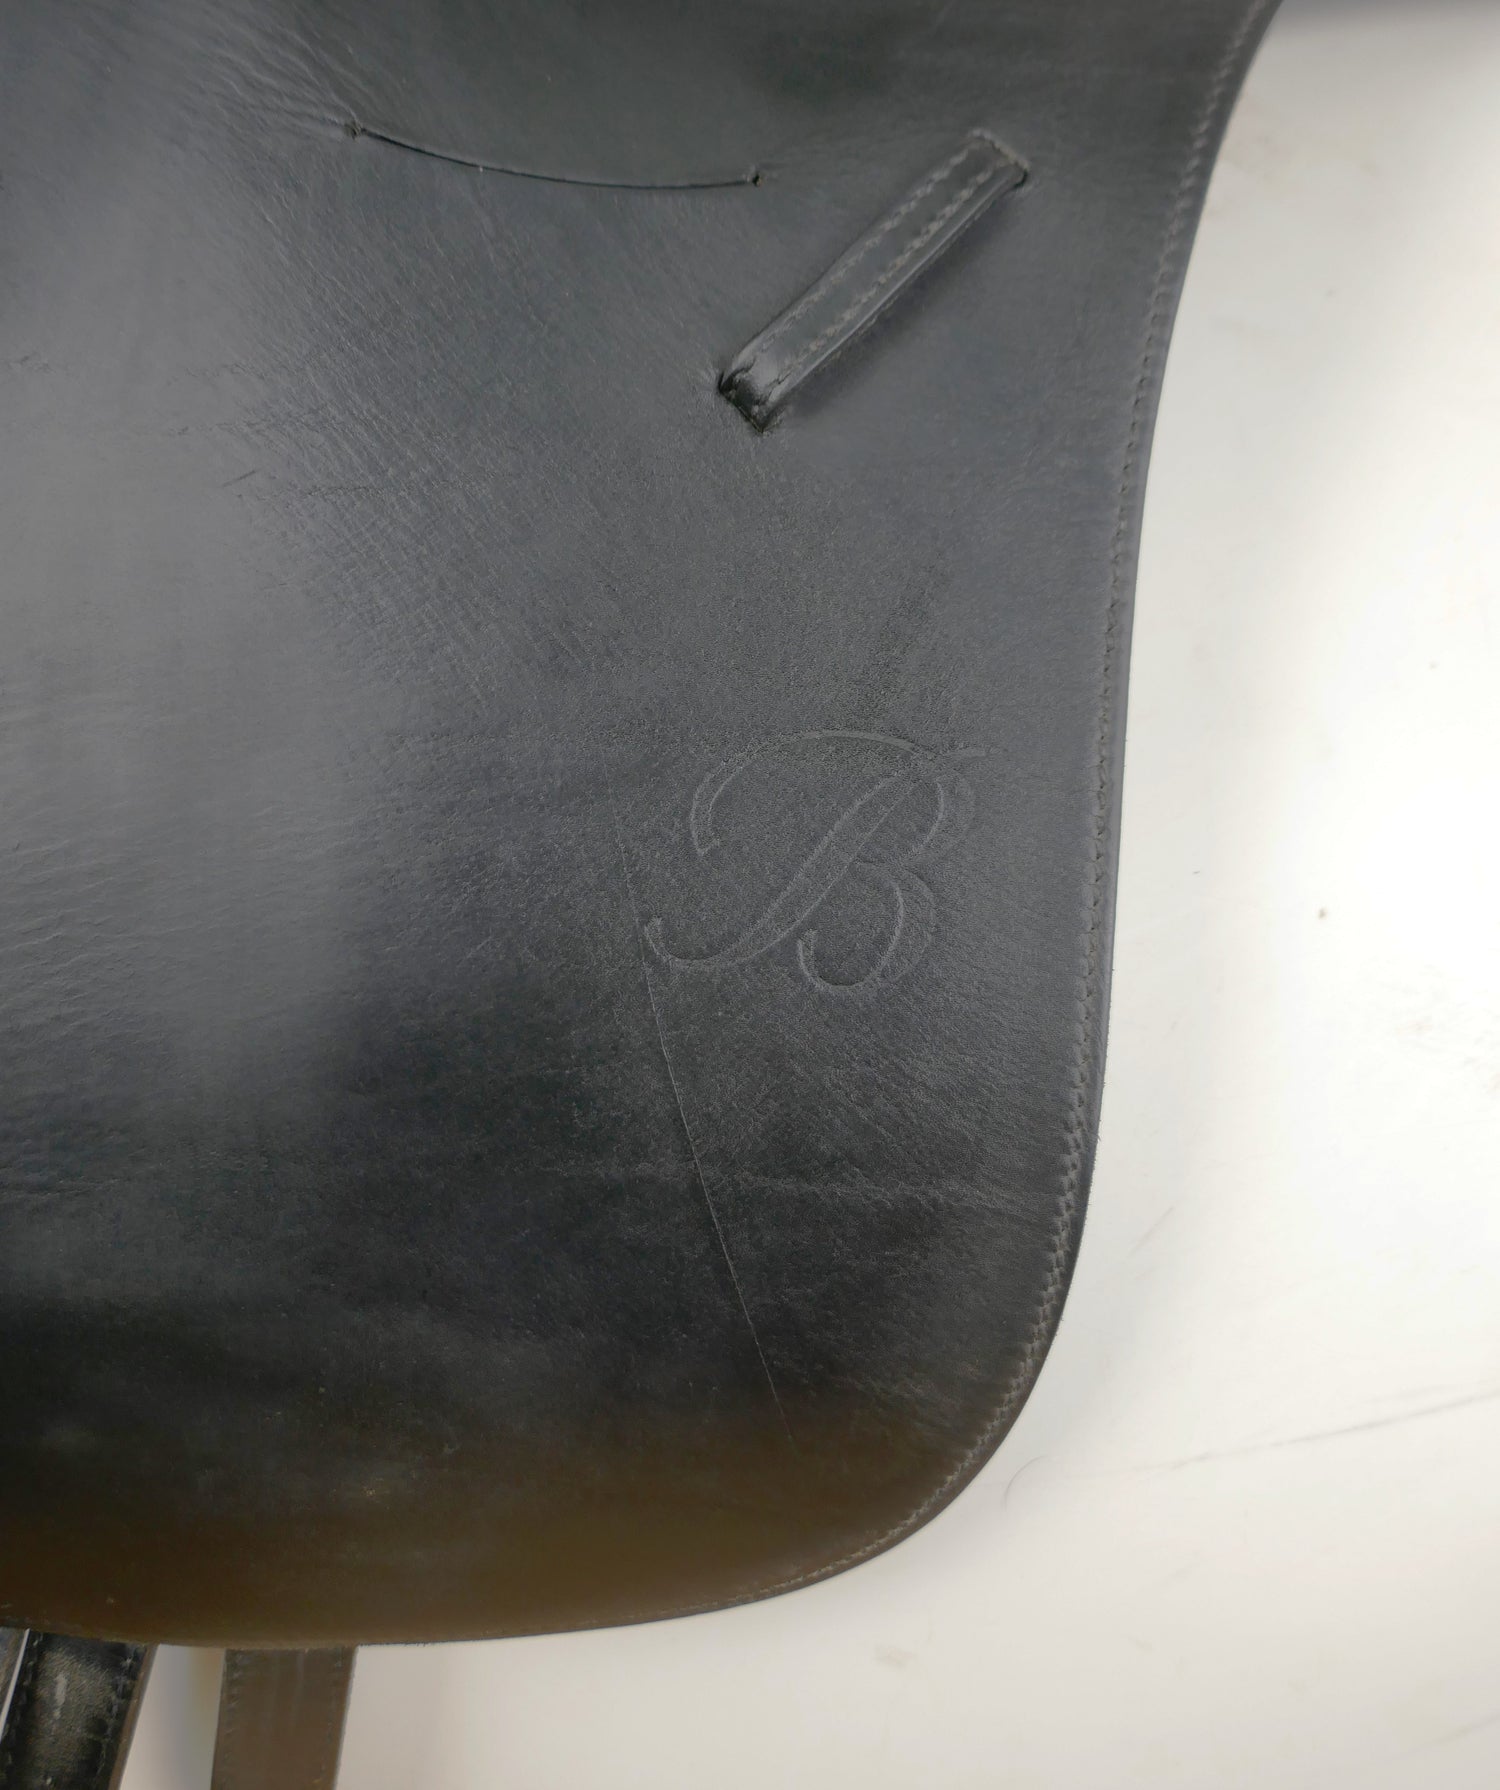 **SOLD** Bates Caprilli Eventing Jump Saddle, 17.5 Seat, Adjustable Tree -  Exchangeable Gullet, CAIR Panels